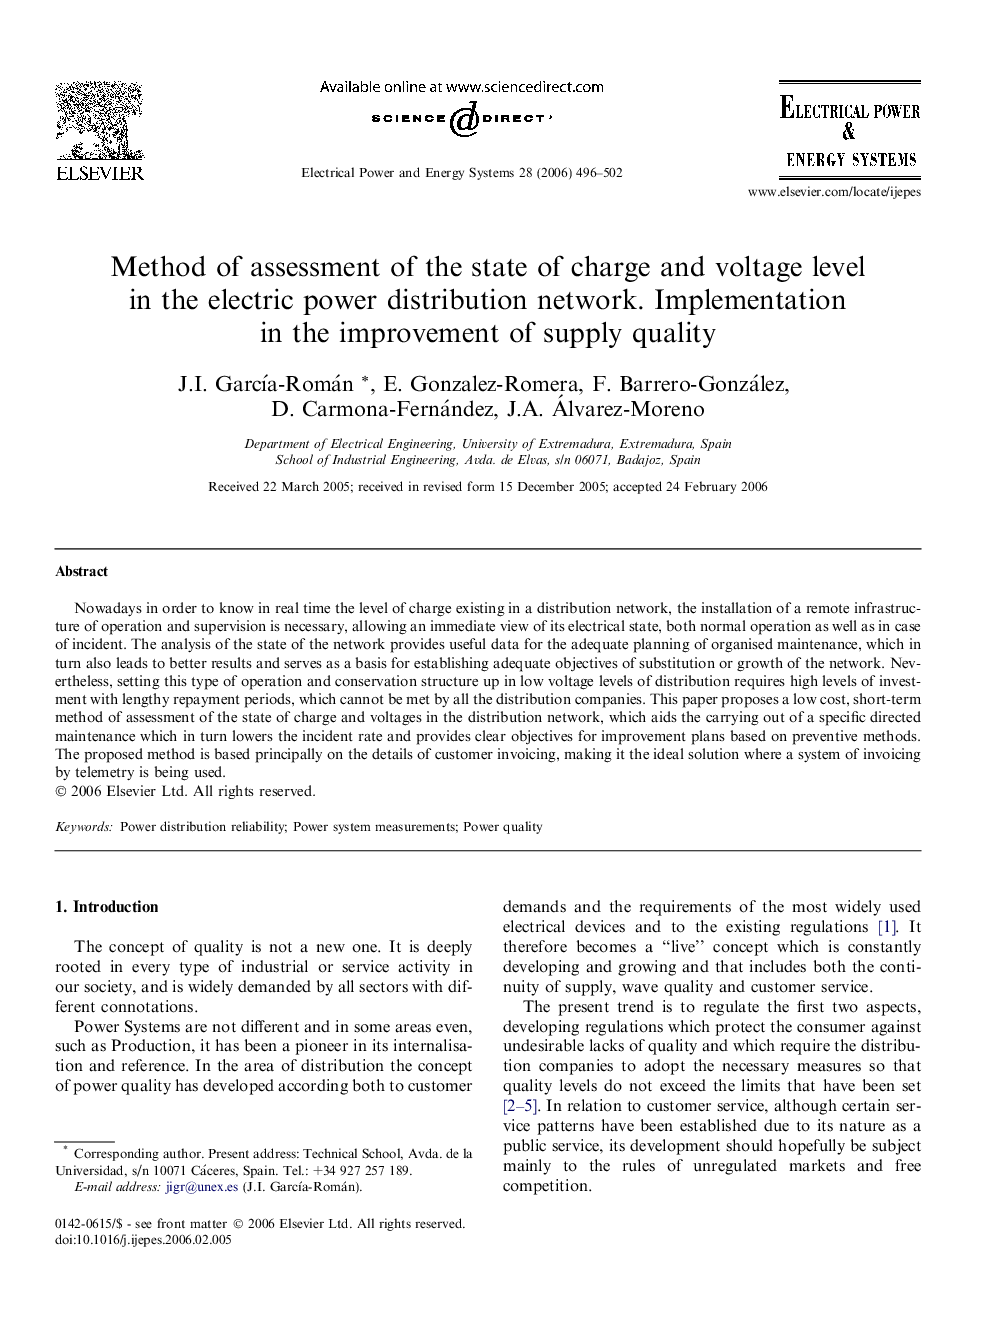 Method of assessment of the state of charge and voltage level in the electric power distribution network. Implementation in the improvement of supply quality